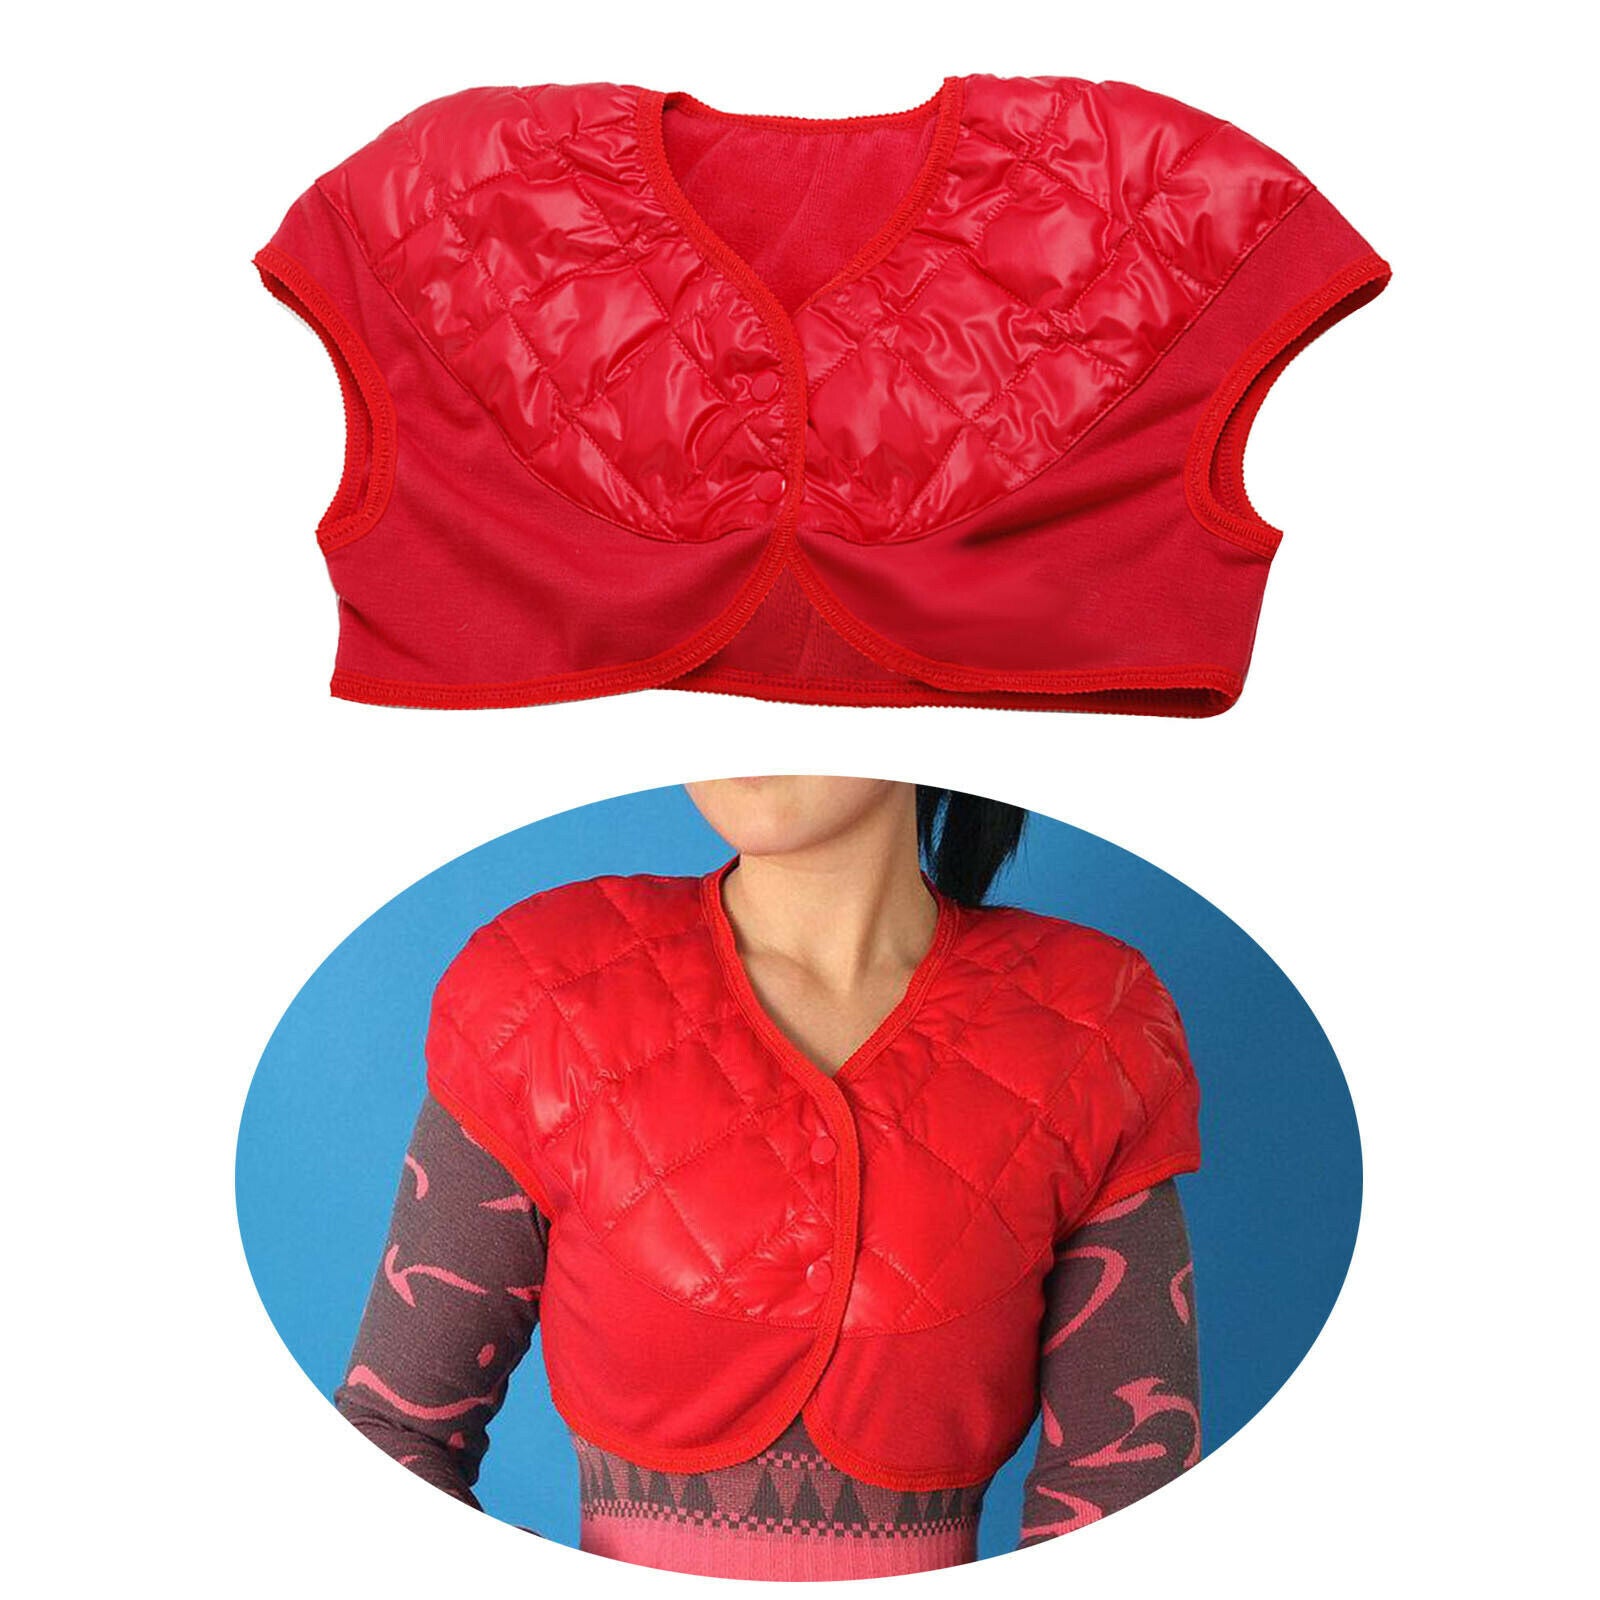 Women Down Jacket Warm Shoulder Warmer Thermal Wrap Protector Red L